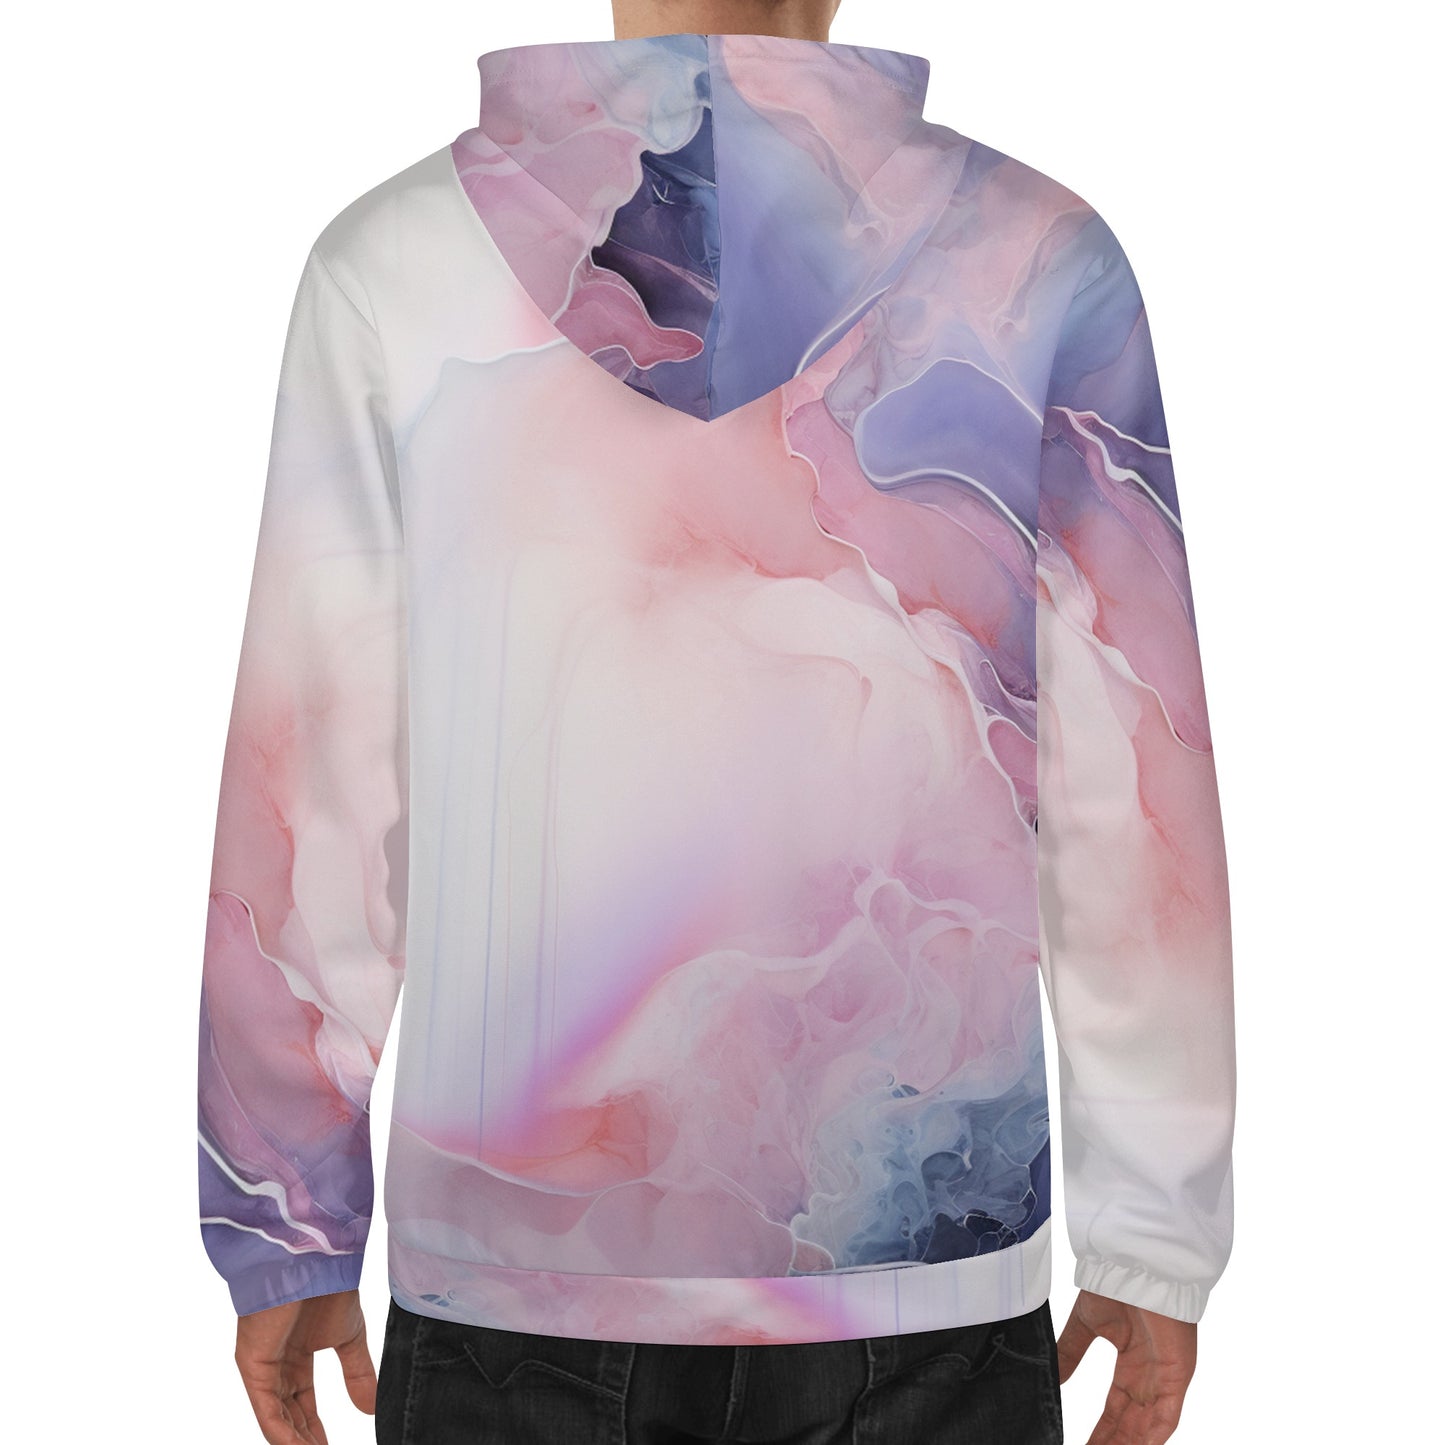 Mens Abstract Art Lightweight Hoodie Sweatshirt - Colorful All Over Print in White, Pink, Purple, Teal